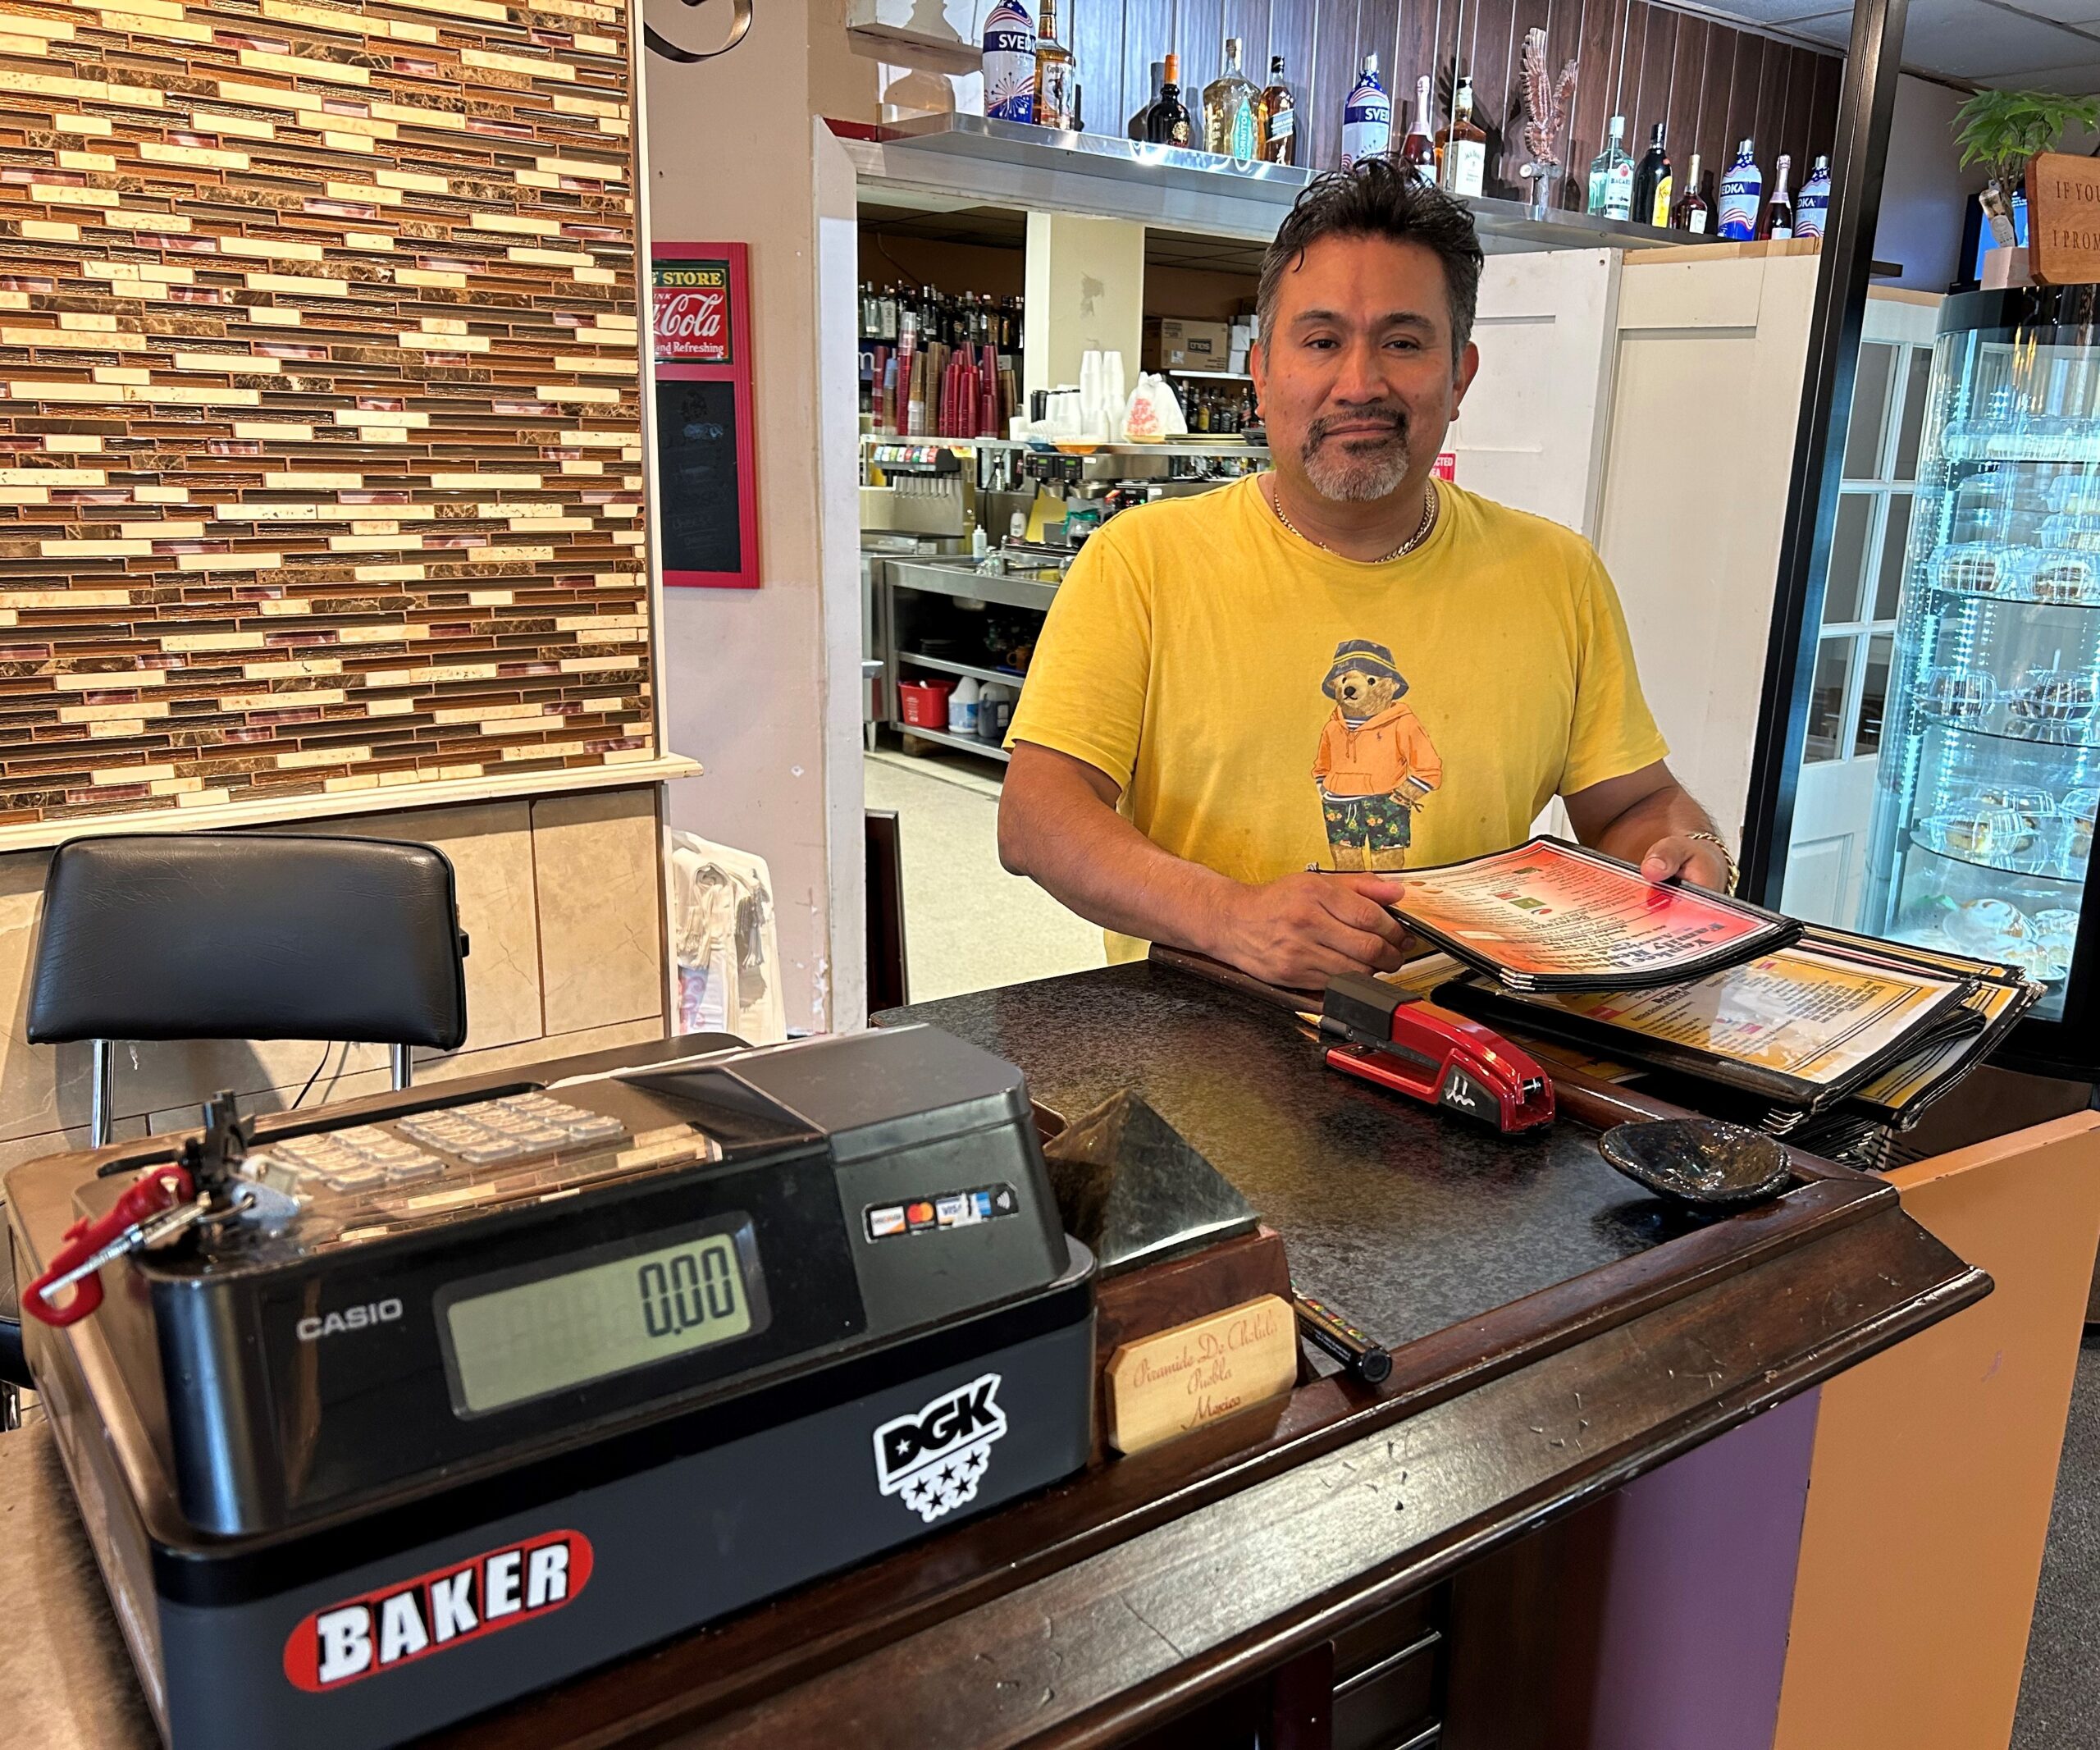 Man in yellow shirt behind a restaurant cash register counter and holding a menu